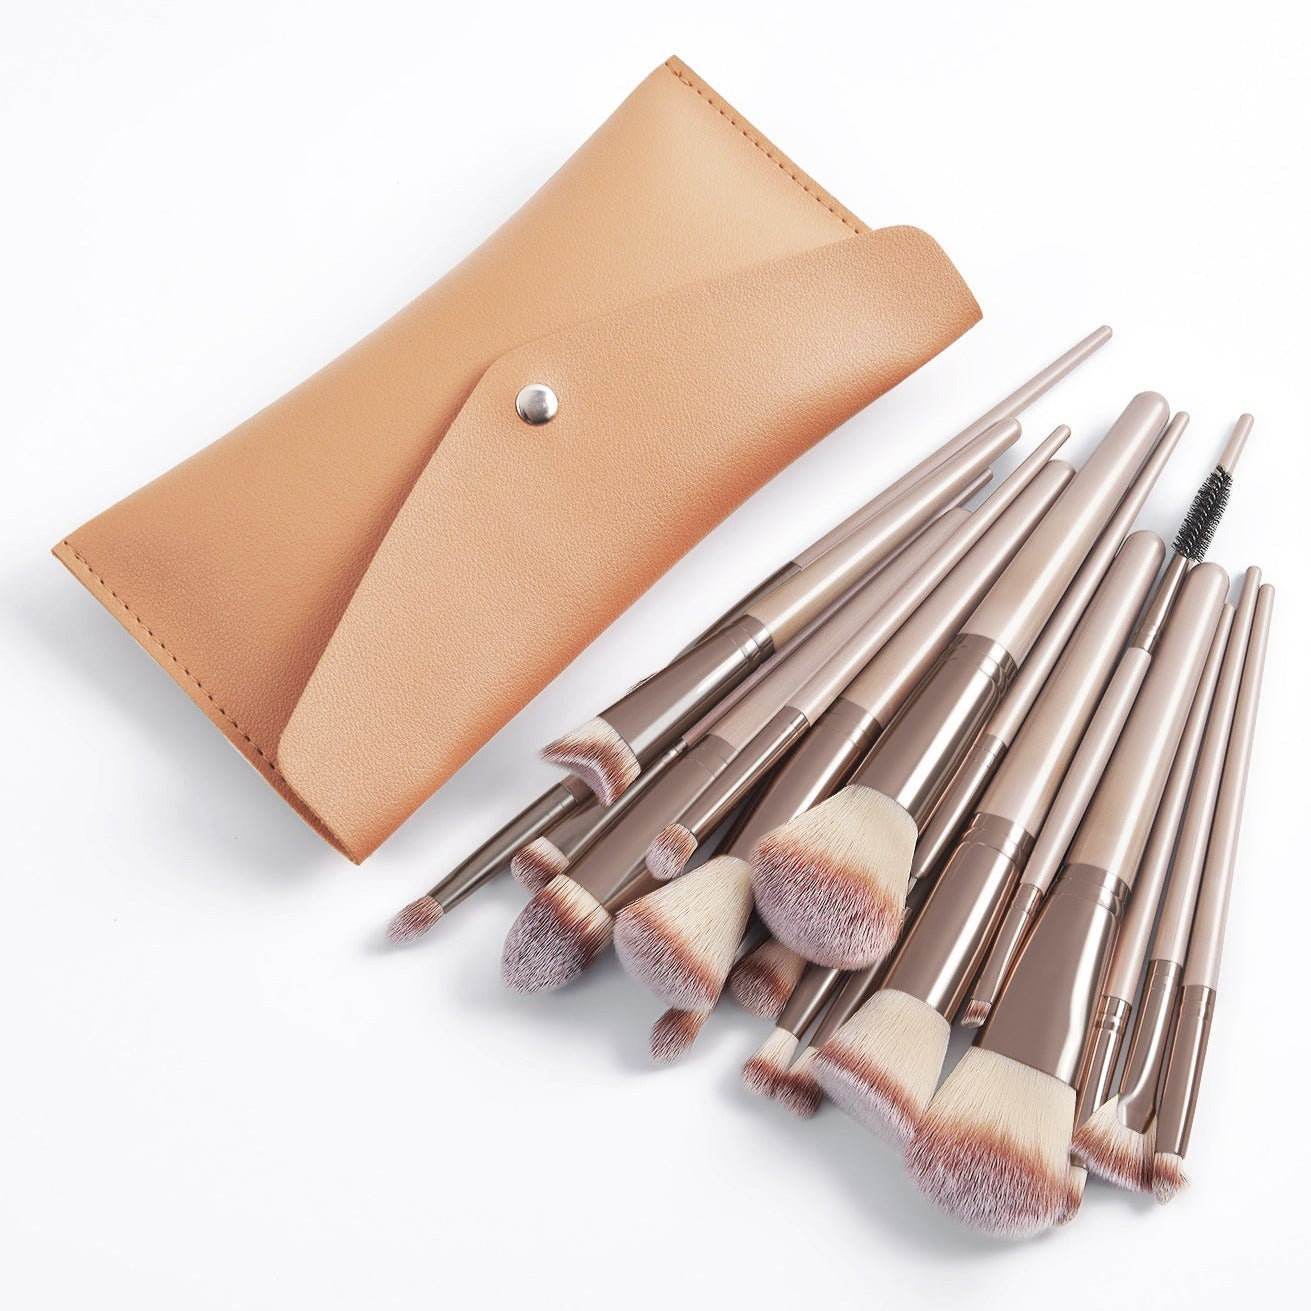 Champagne makeup brushes